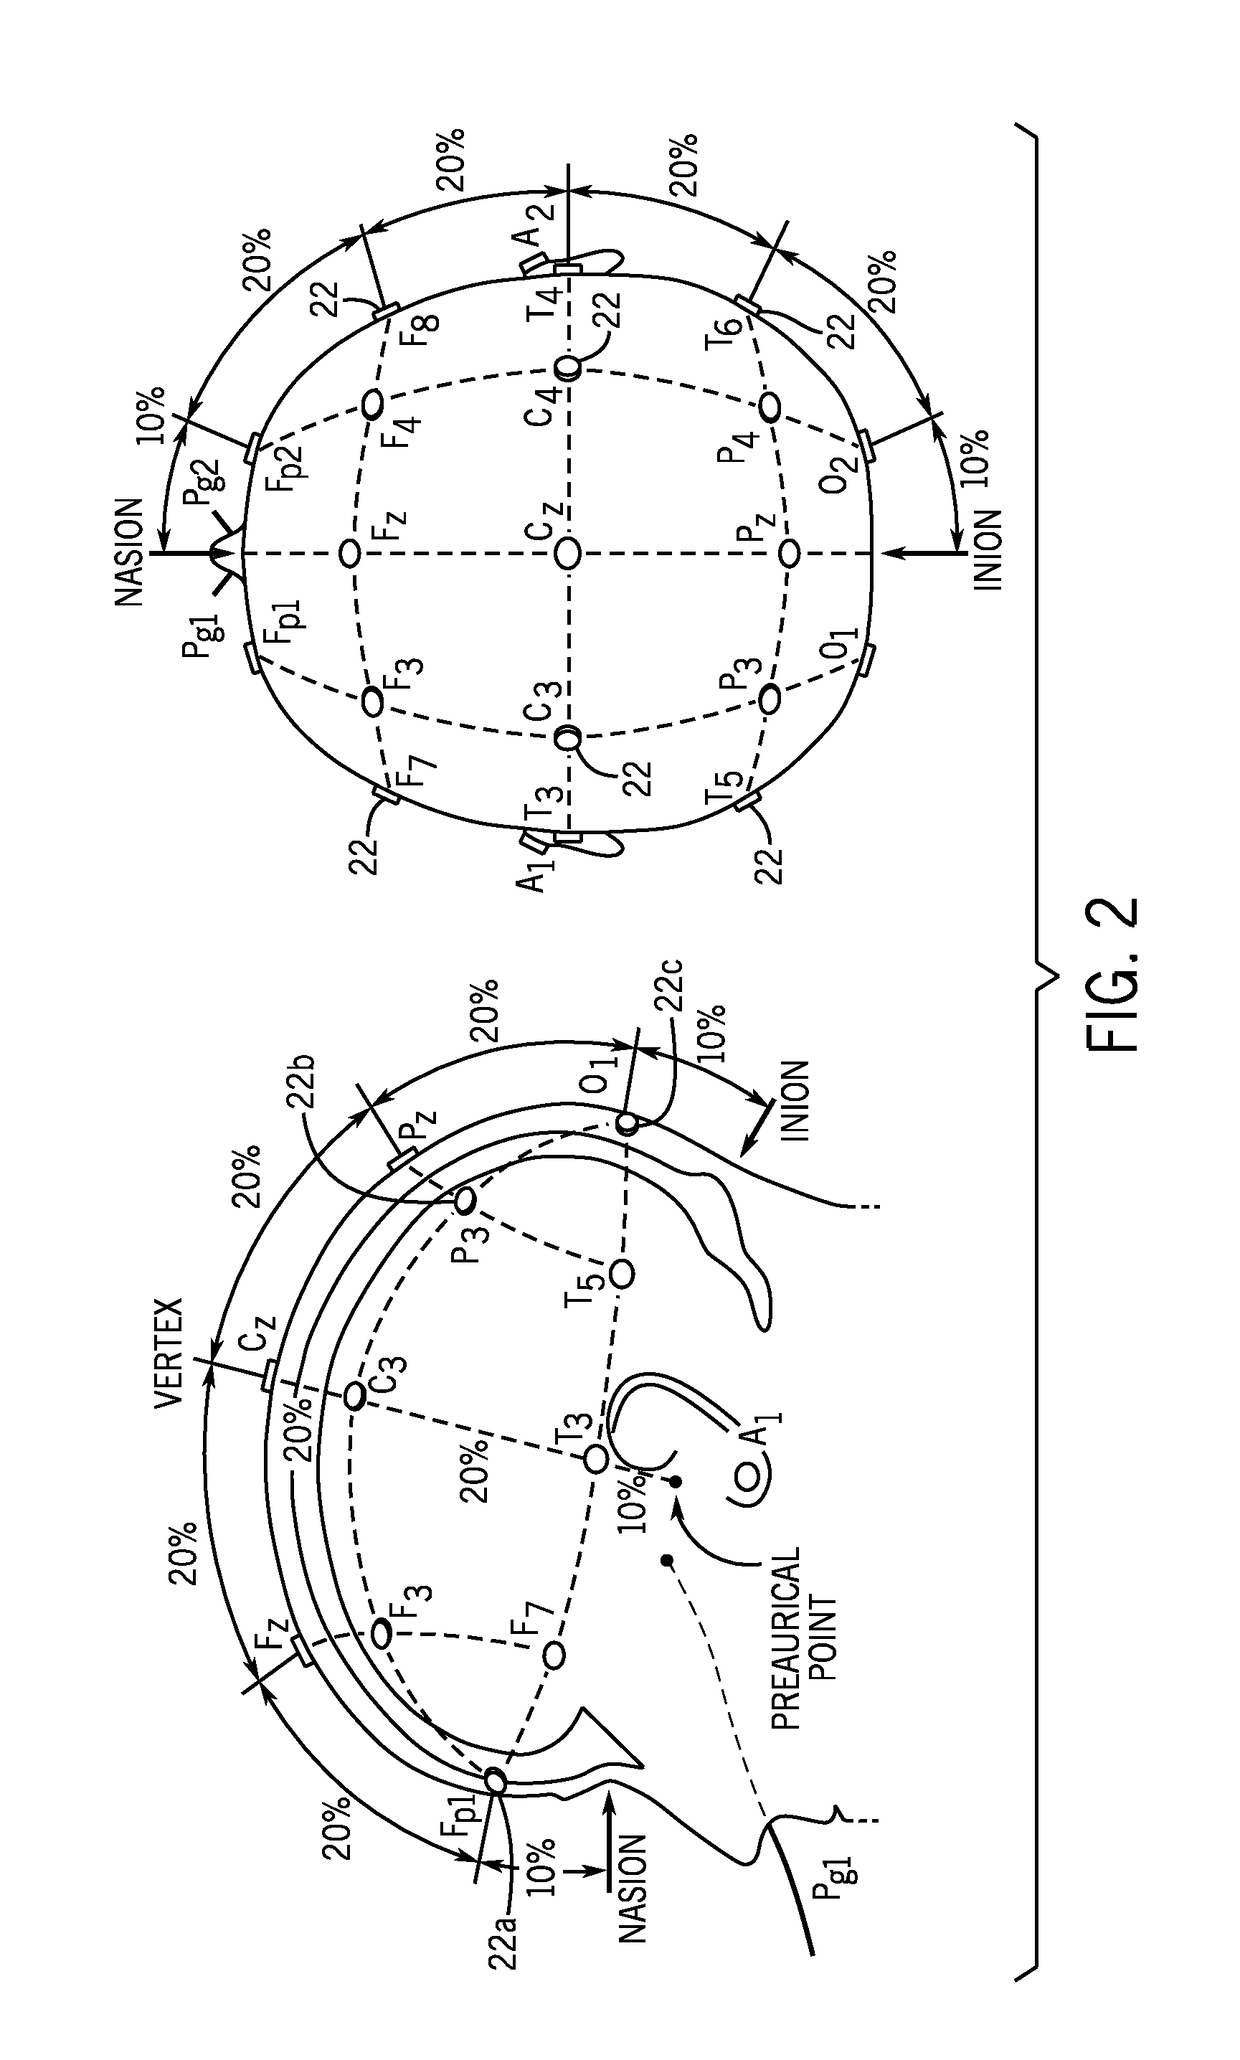 System and method for electrical impedance spectroscopy